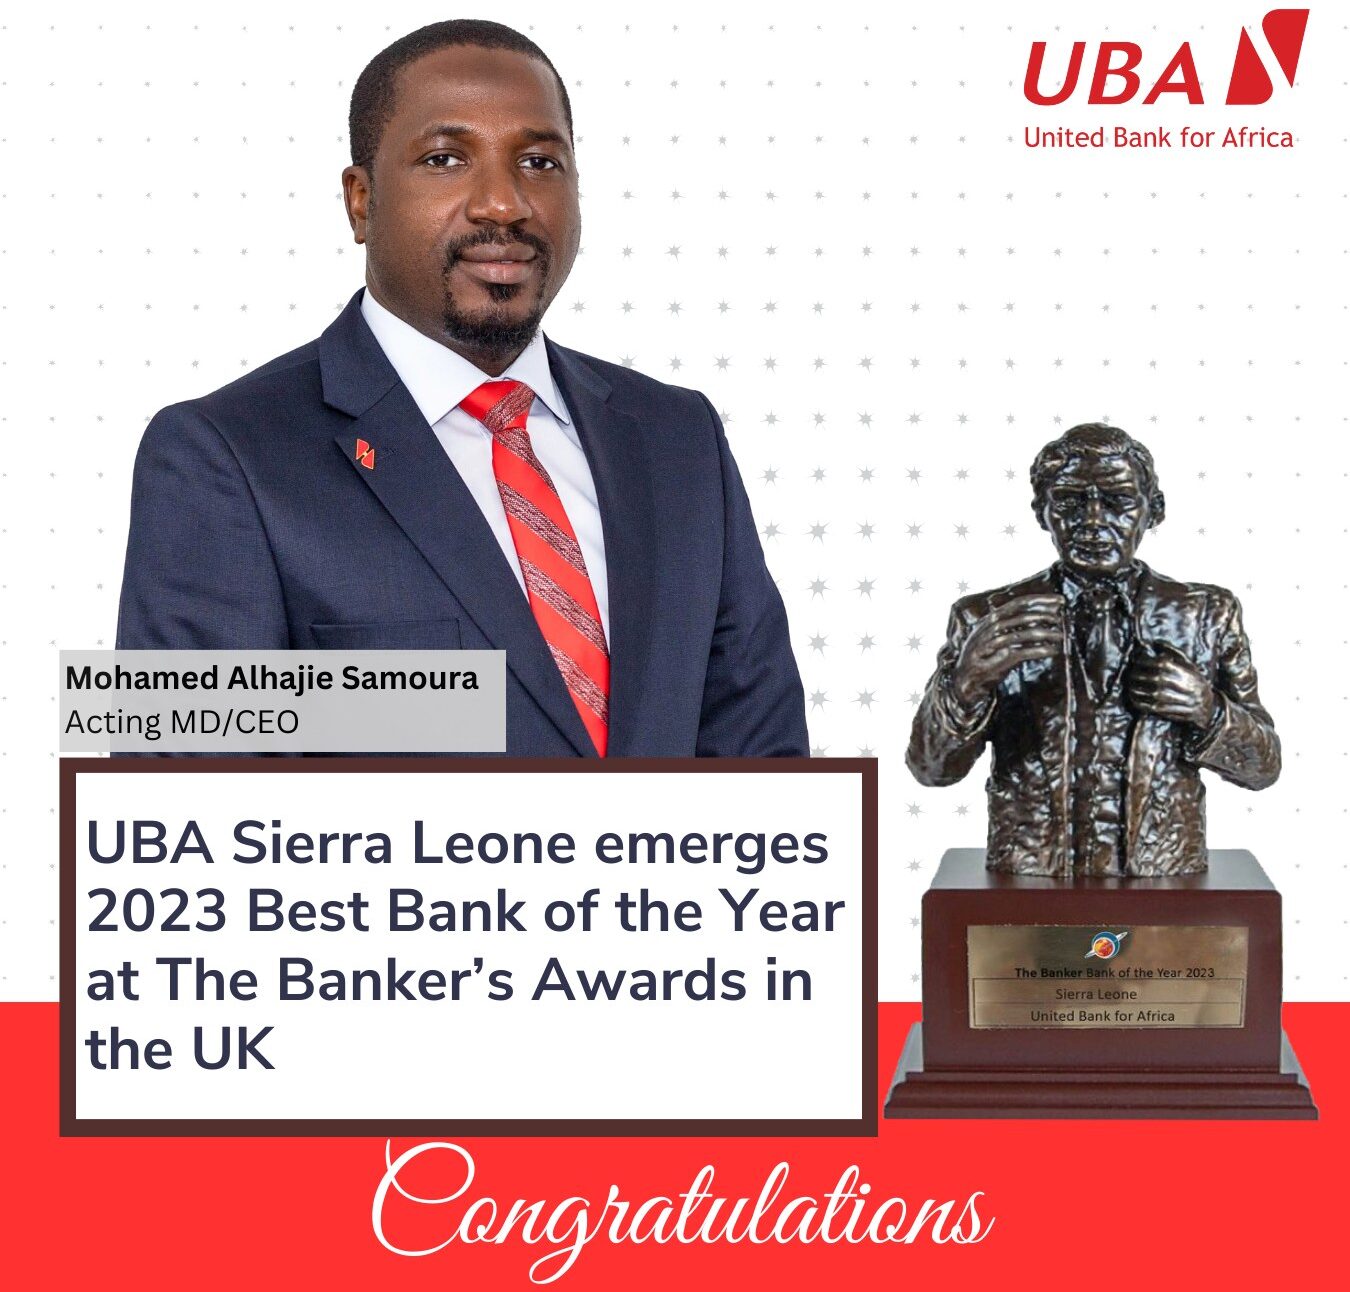 “UBA Sierra Leone: Crowned The Banker’s Best Bank – A Reign of Excellence!”